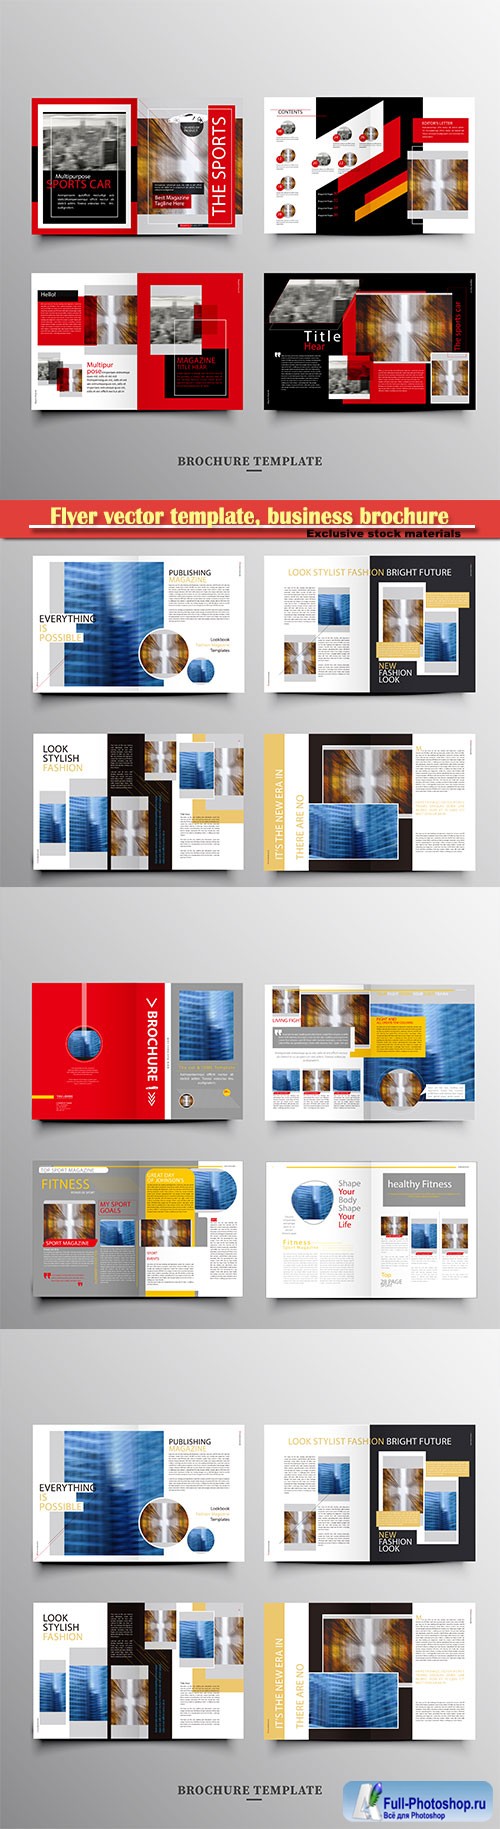 Flyer vector template, business brochure, magazine cover # 31